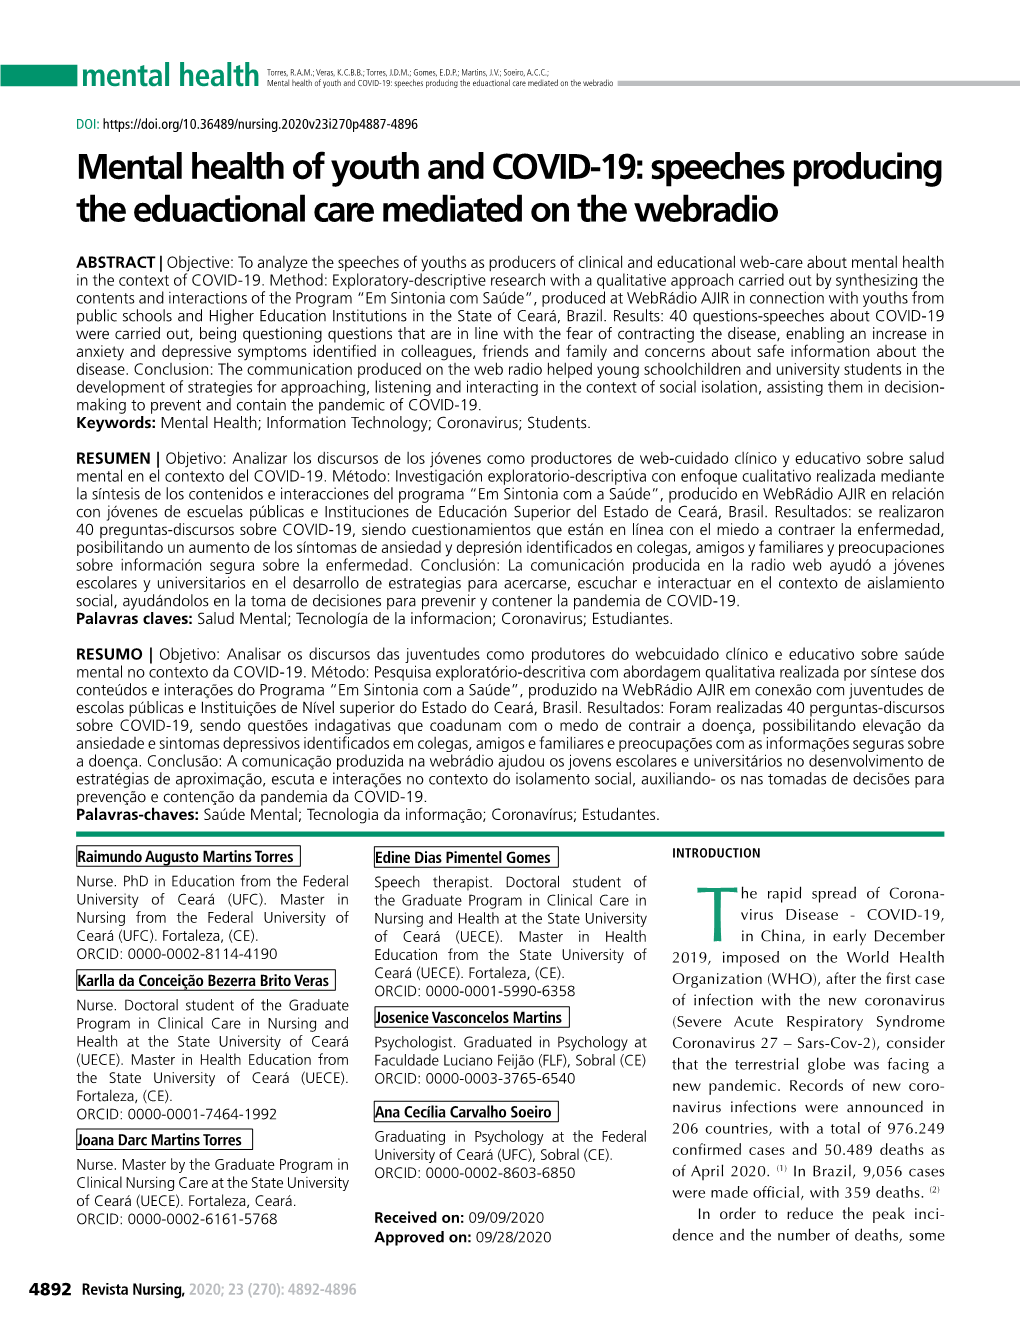 Mental Health of Youth and COVID-19: Speeches Producing the Eduactional Care Mediated on the Webradio